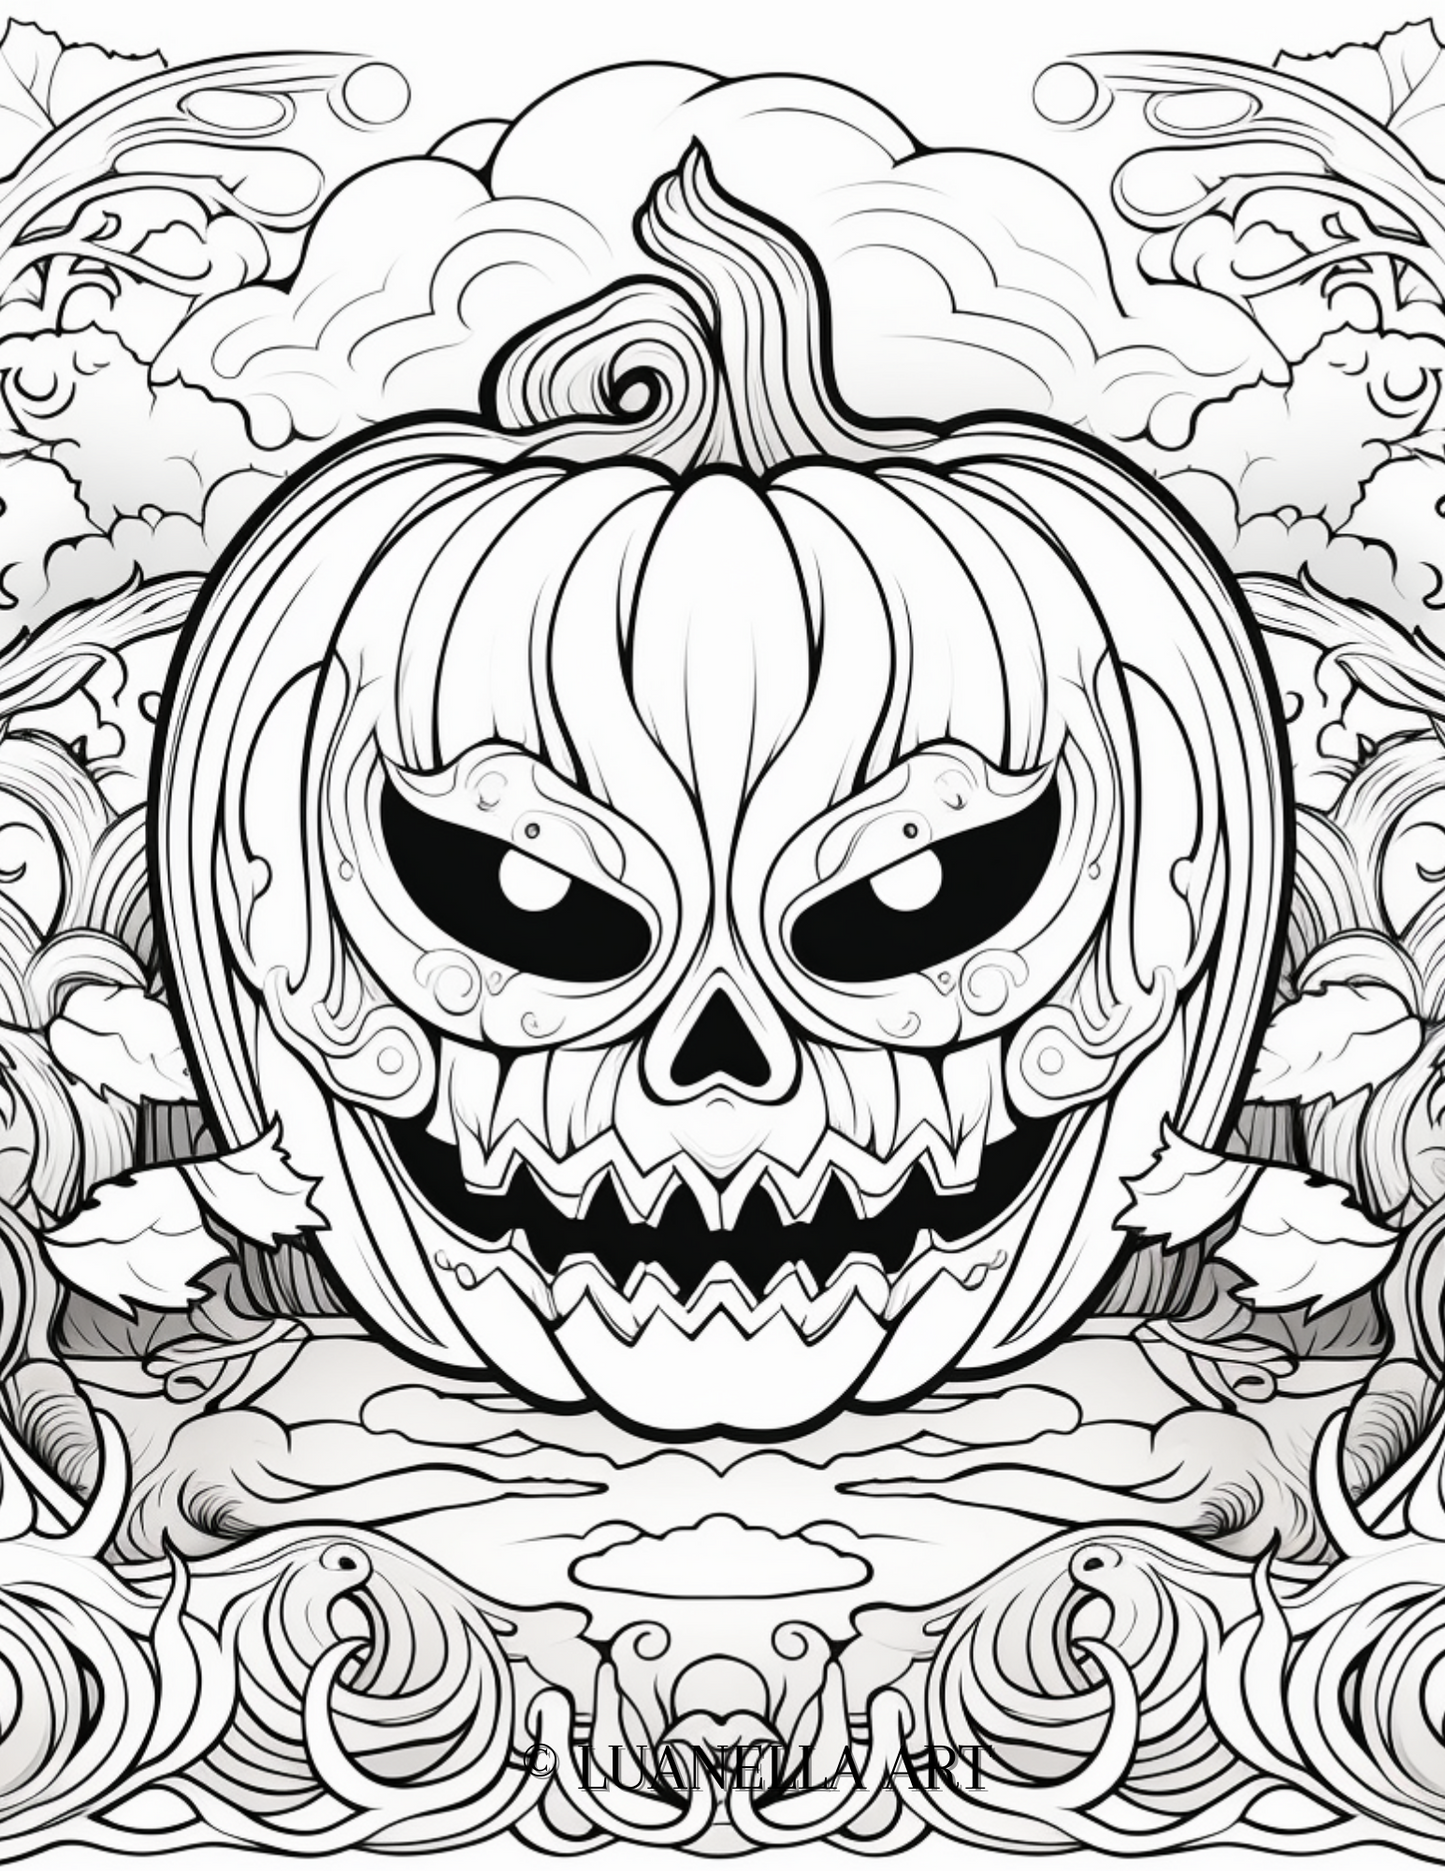 Perfect Carved Pumpkin  | Coloring Page | Instant Digital Download